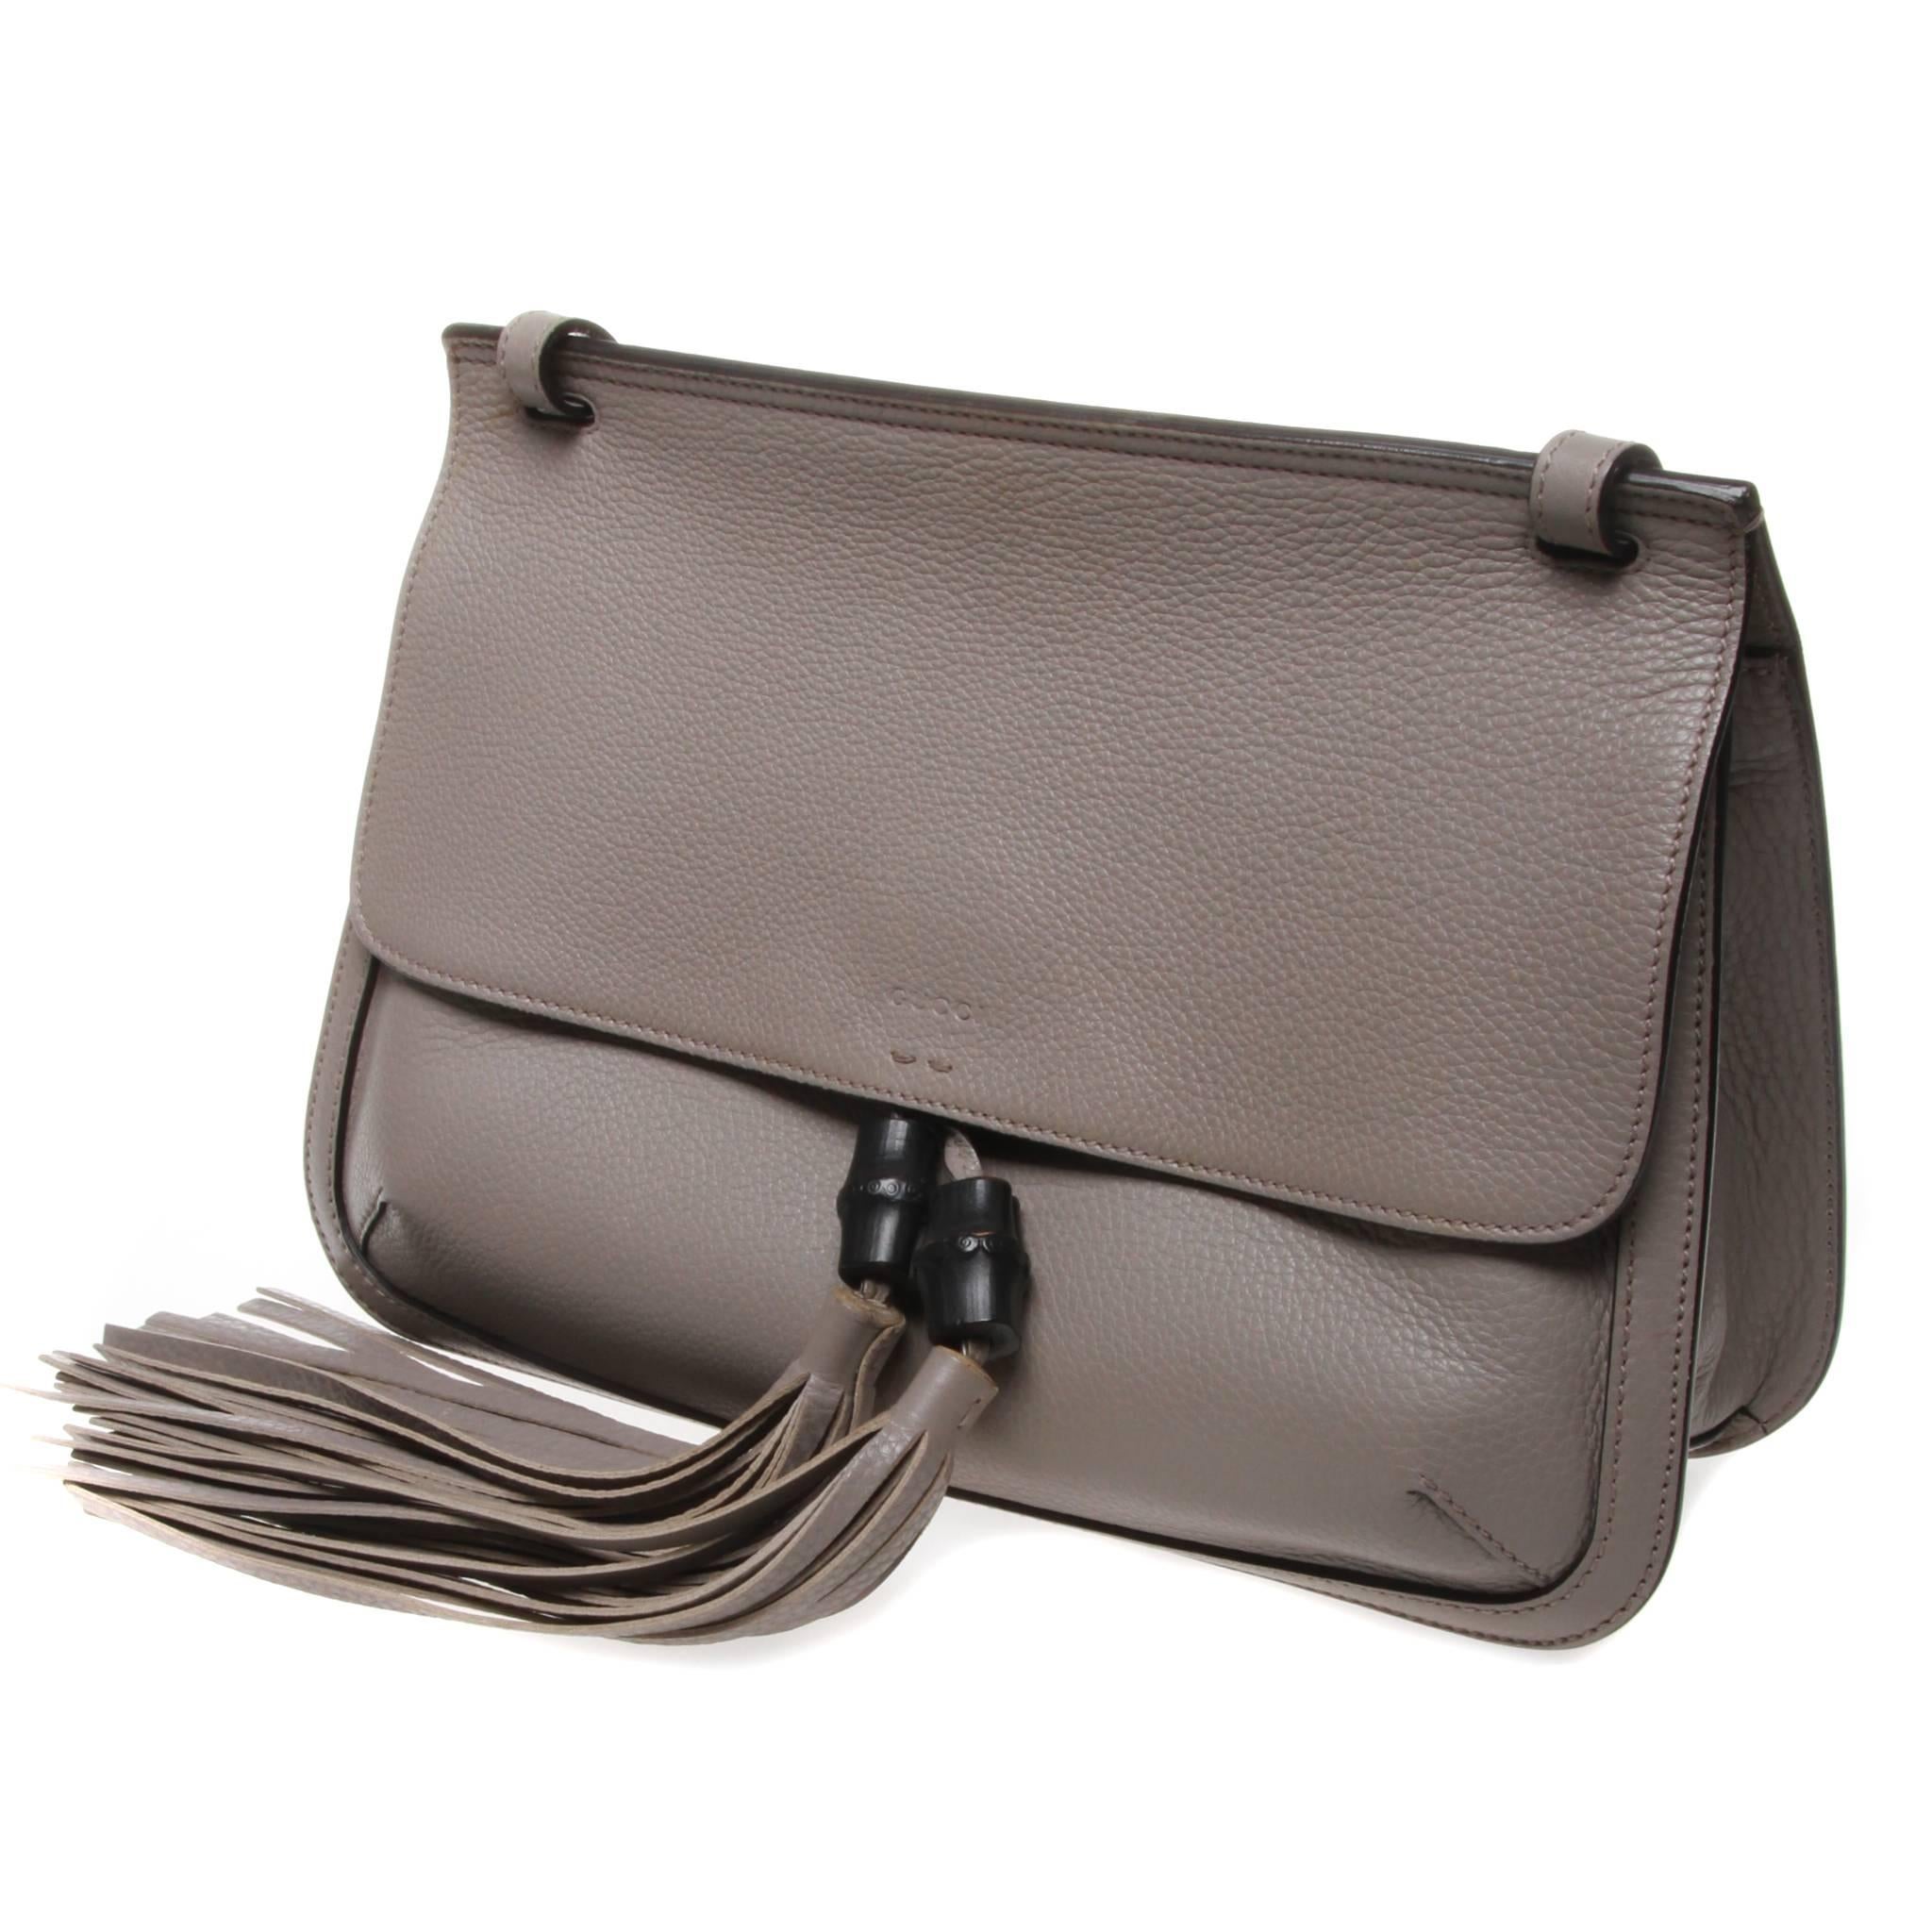 Gucci Bamboo Daily leather flap shoulder bag in light grey. This bag features a main compartment with two open pockets and one zip pocket sewn into the tone-on-tone baiadera cotton-linen lining, an open front pocket outside the main compartment and